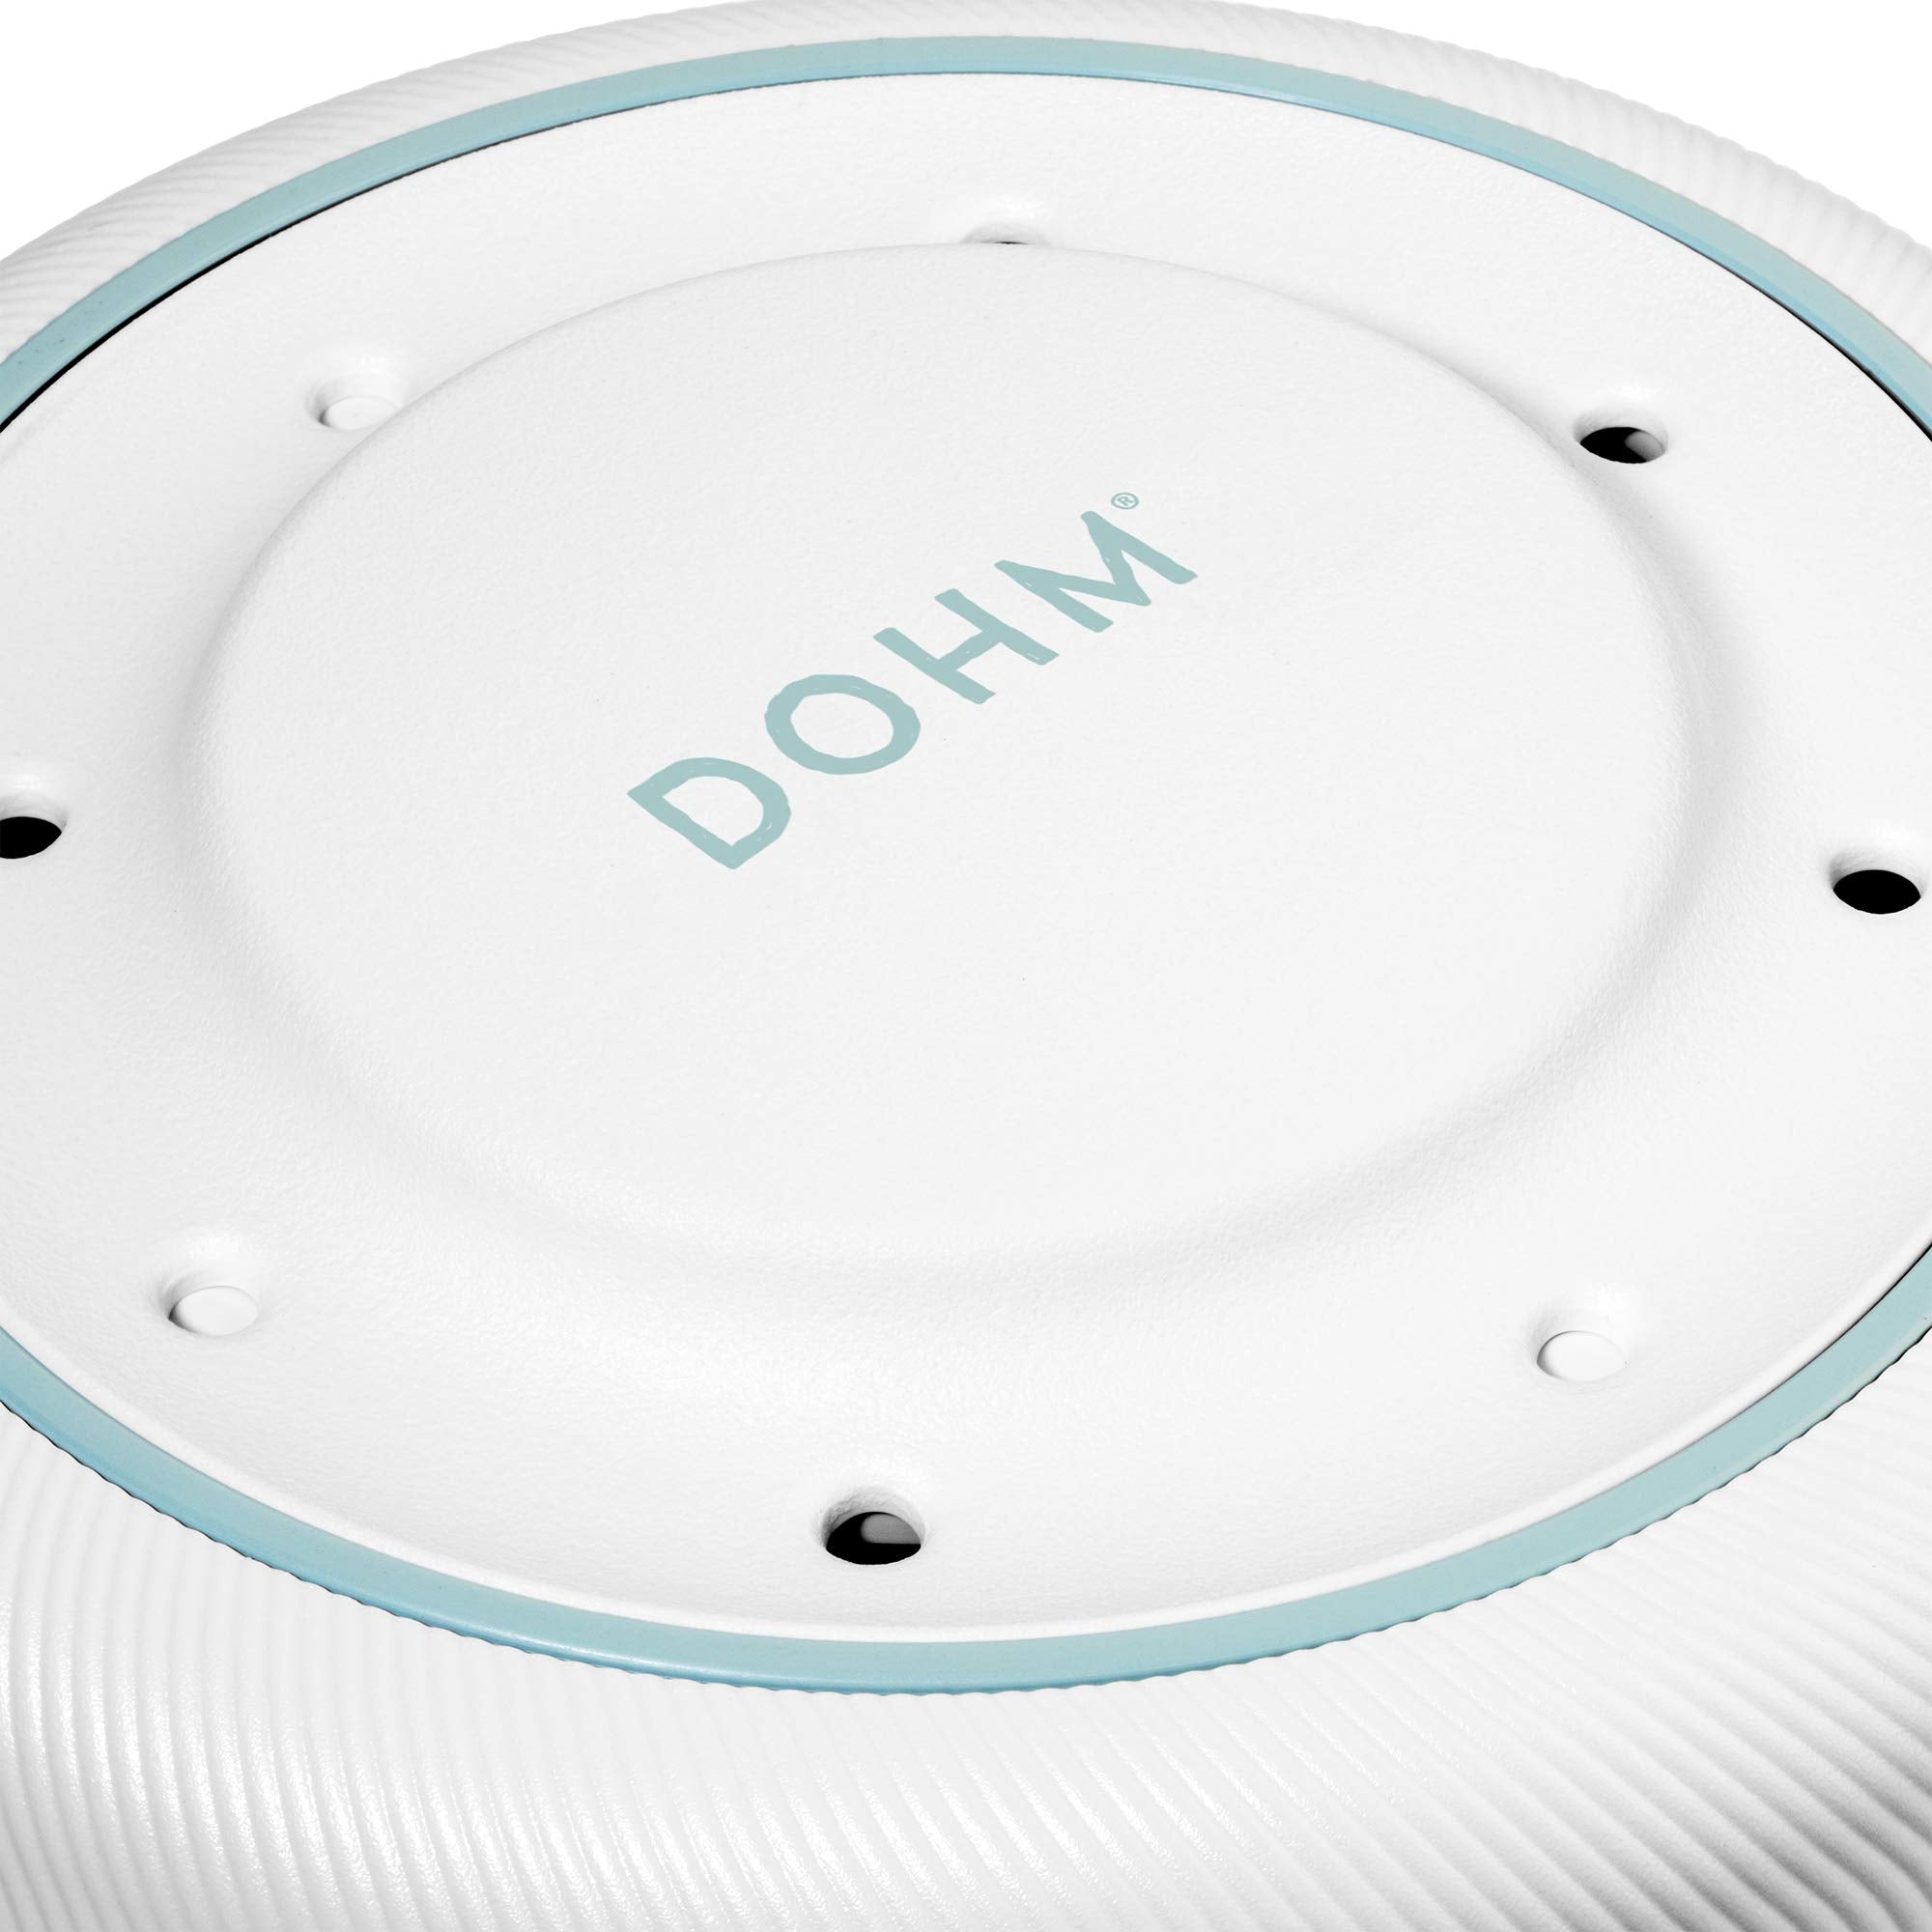 Yogasleep Dohm (White/Blue) The Original White Noise Machine, Relaxing Natural Sound from a Real Fan, Noise Masking, Sleep Aid, Office Privacy, For Adults & Baby, Travel